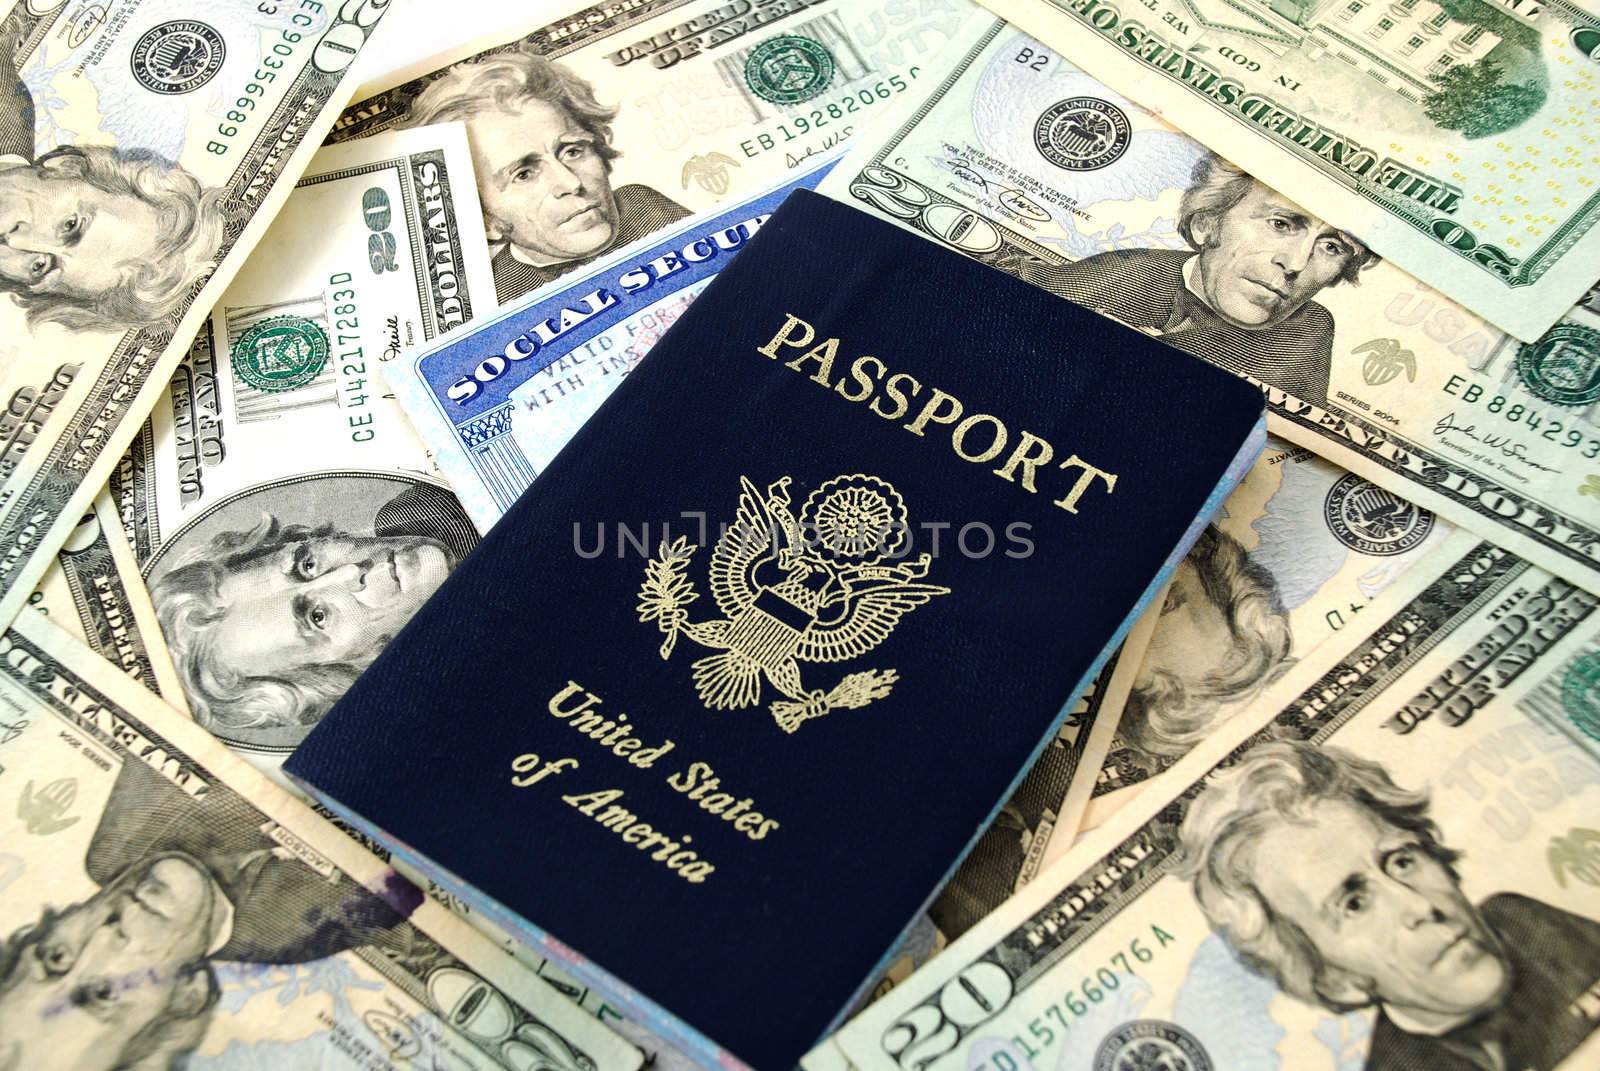 social security card, a passport and several dollar notes